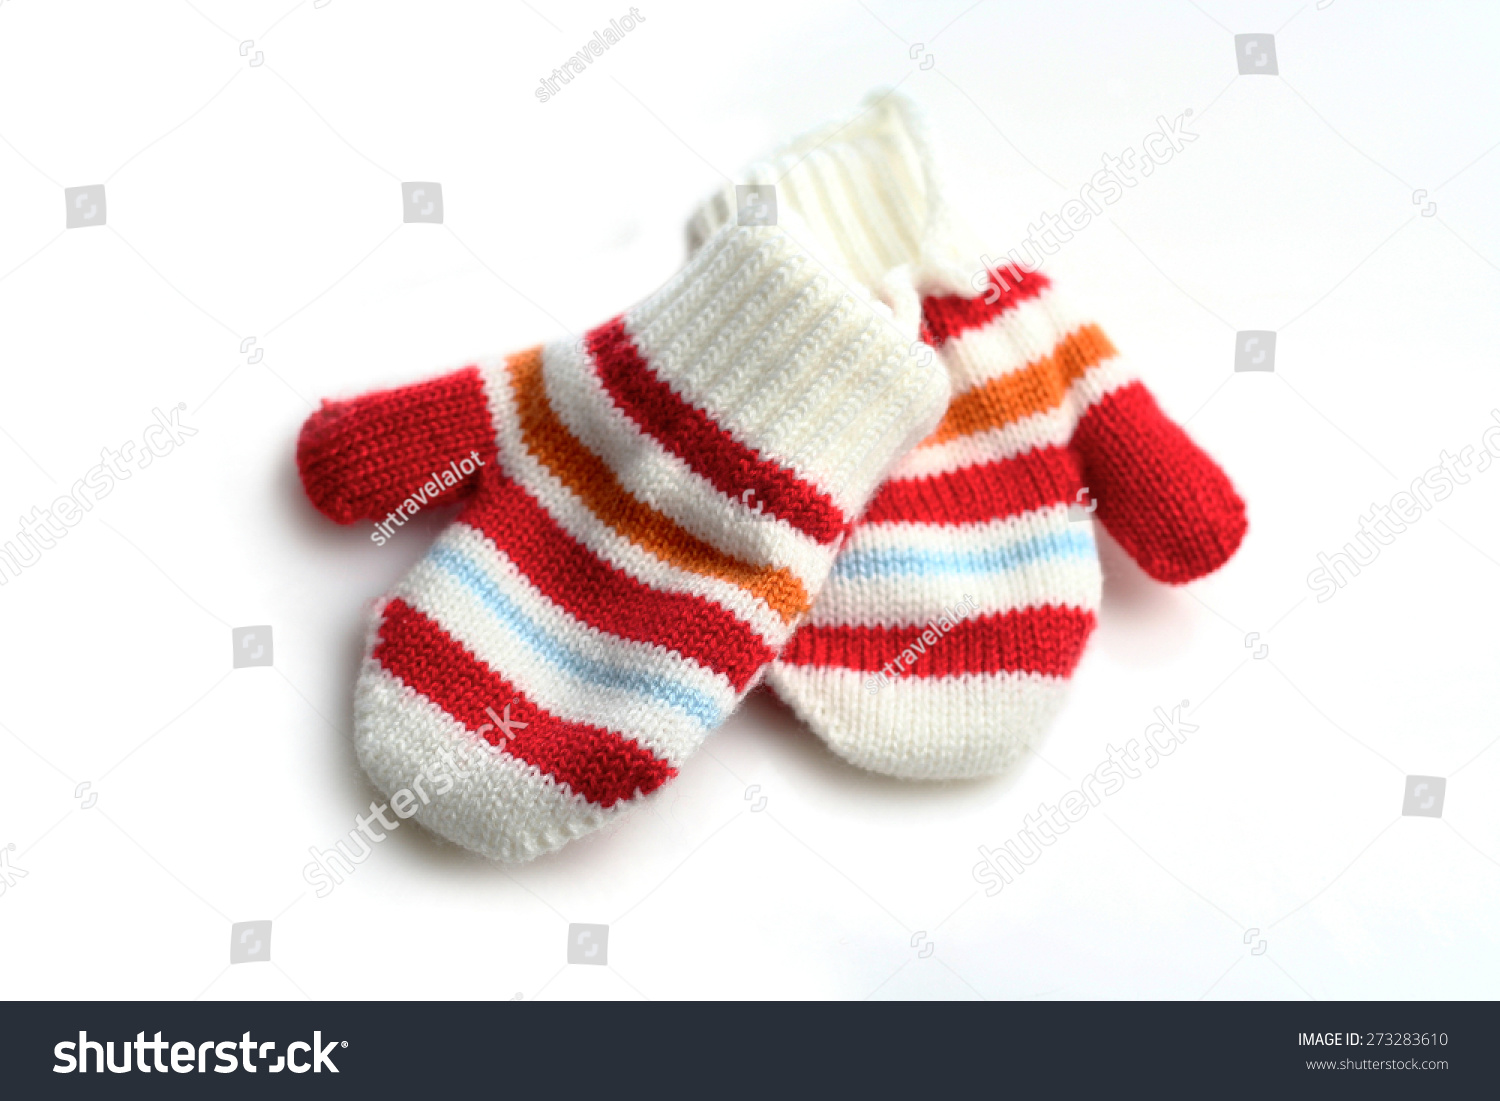 23,900 Baby gloves Images, Stock Photos & Vectors | Shutterstock